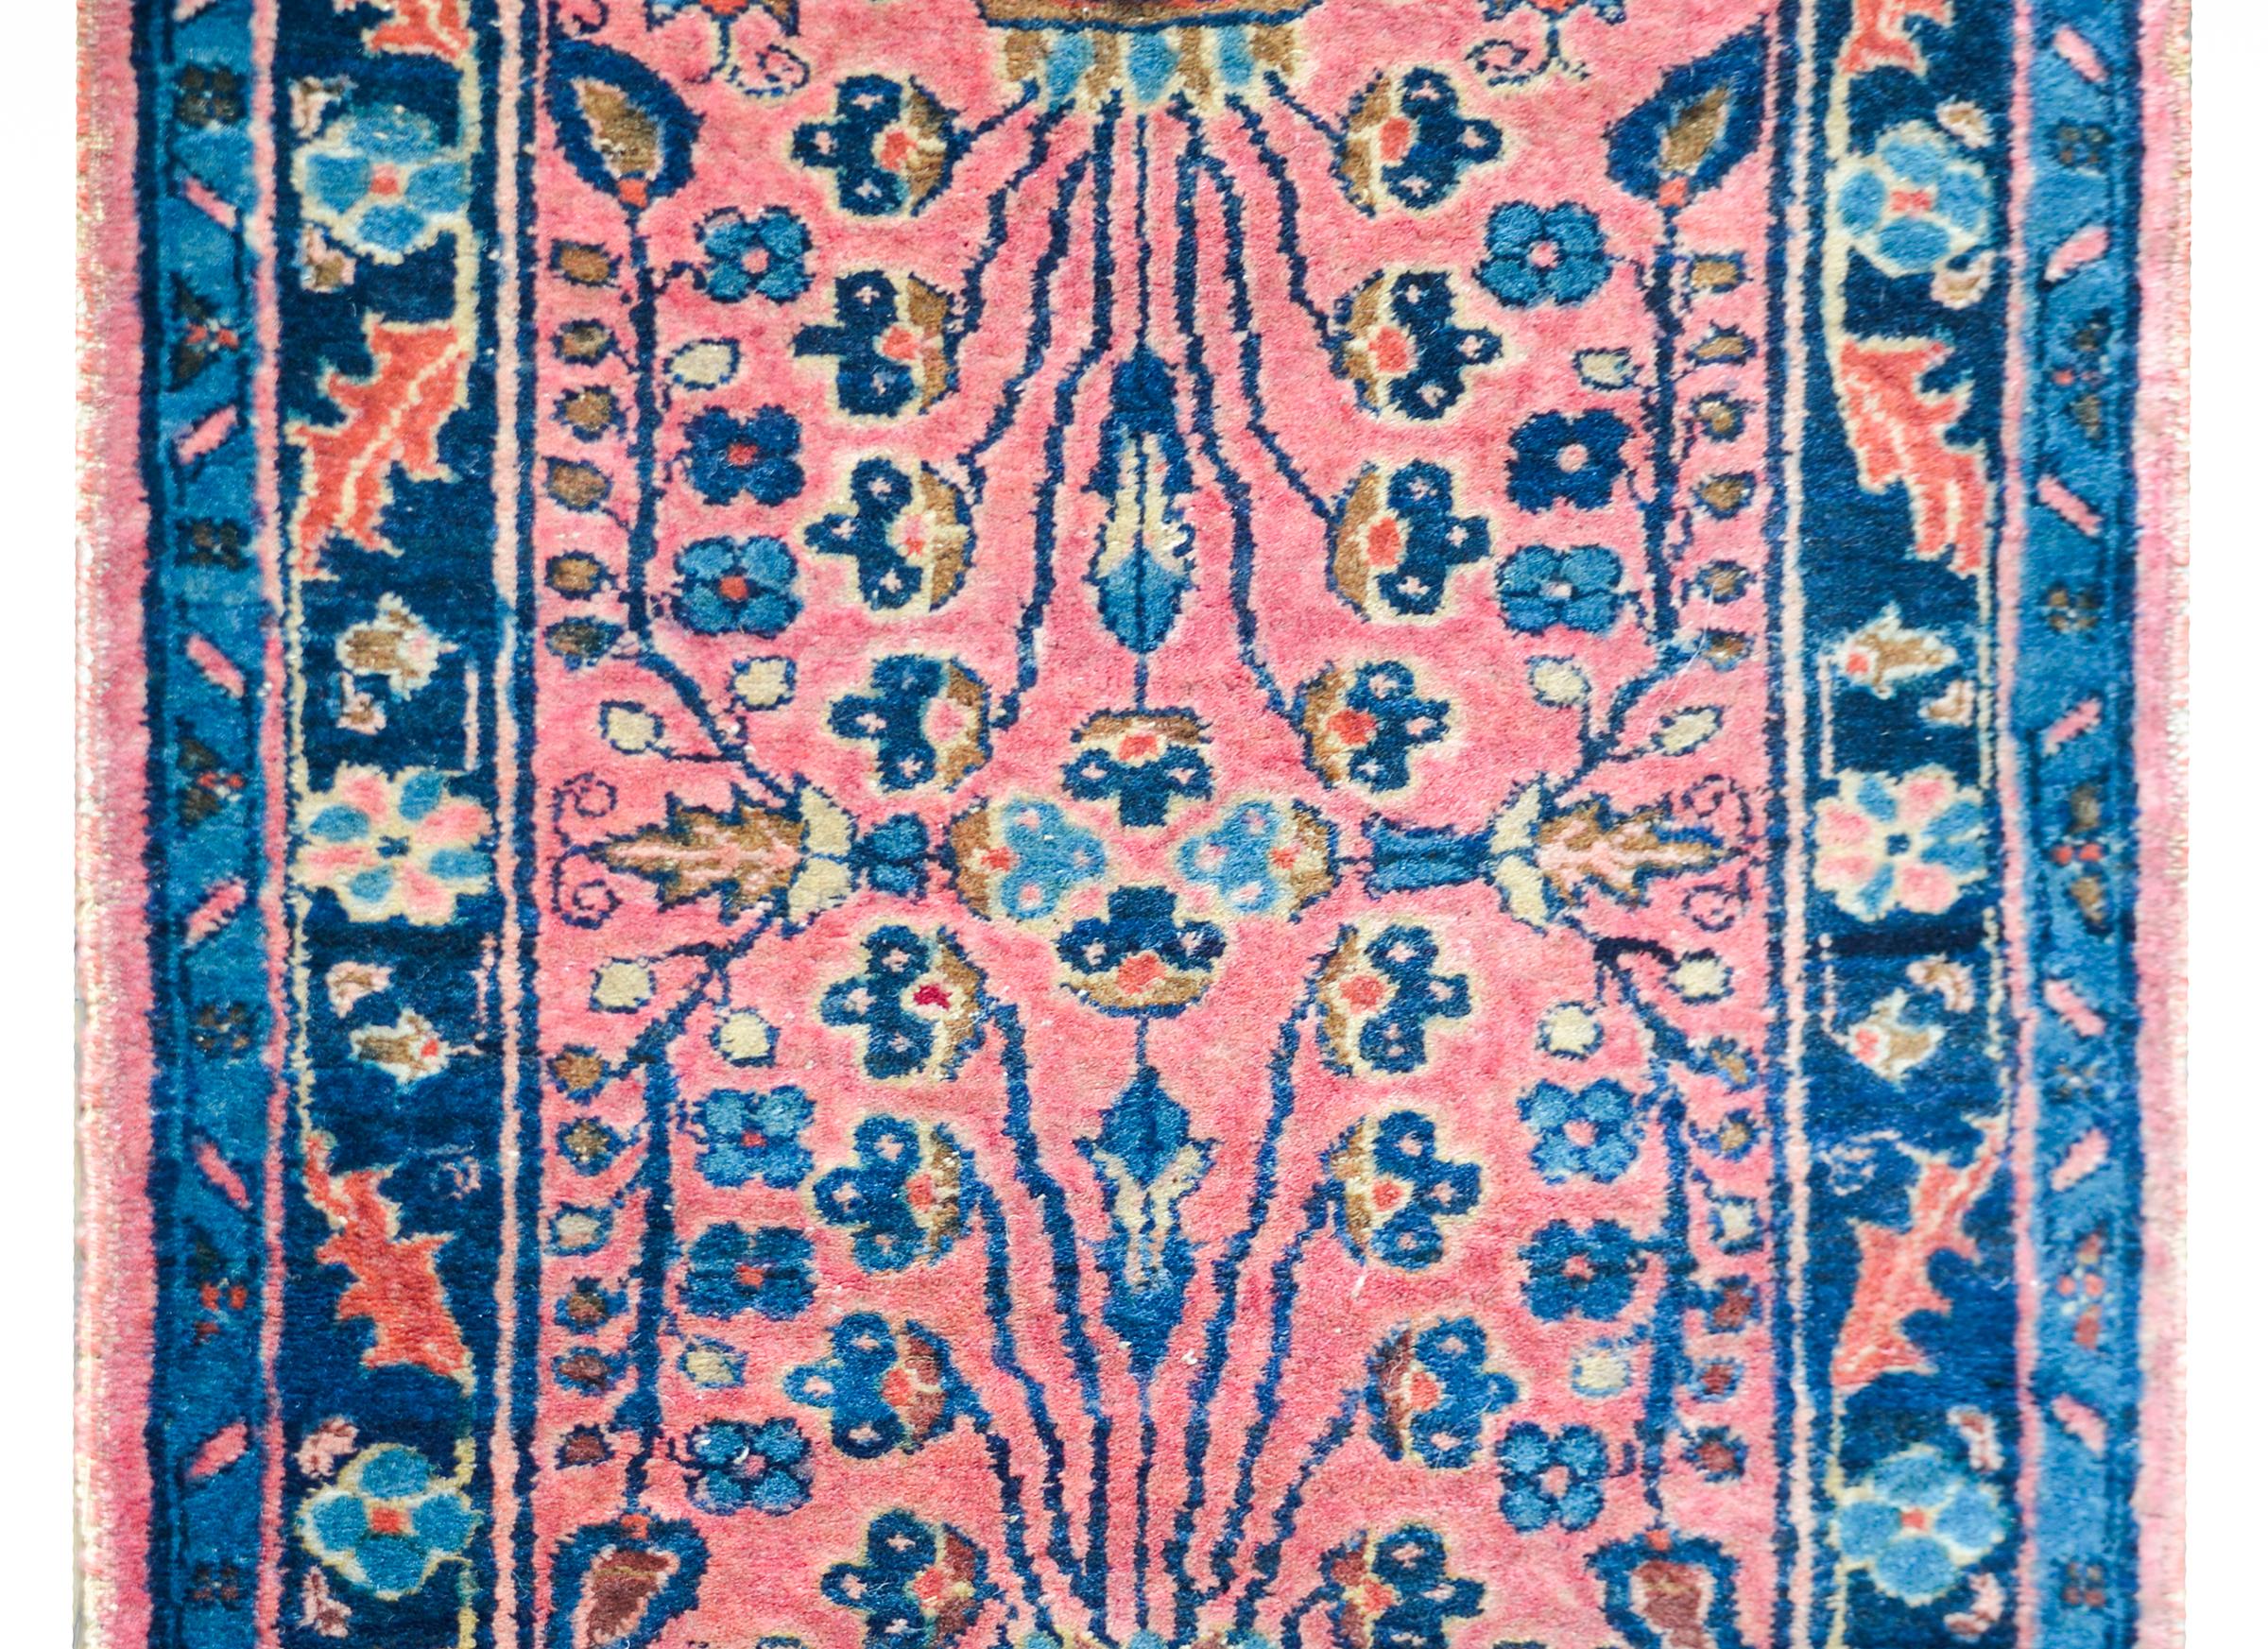 A fantastic early 20th century Persian Lilihan rug with a mirrored Tree-of-life pattern depicting a potted tree with several flowering branches, and surrounded by a beautiful border of leaves and flowers, and all woven in wonderful pinks, creams,